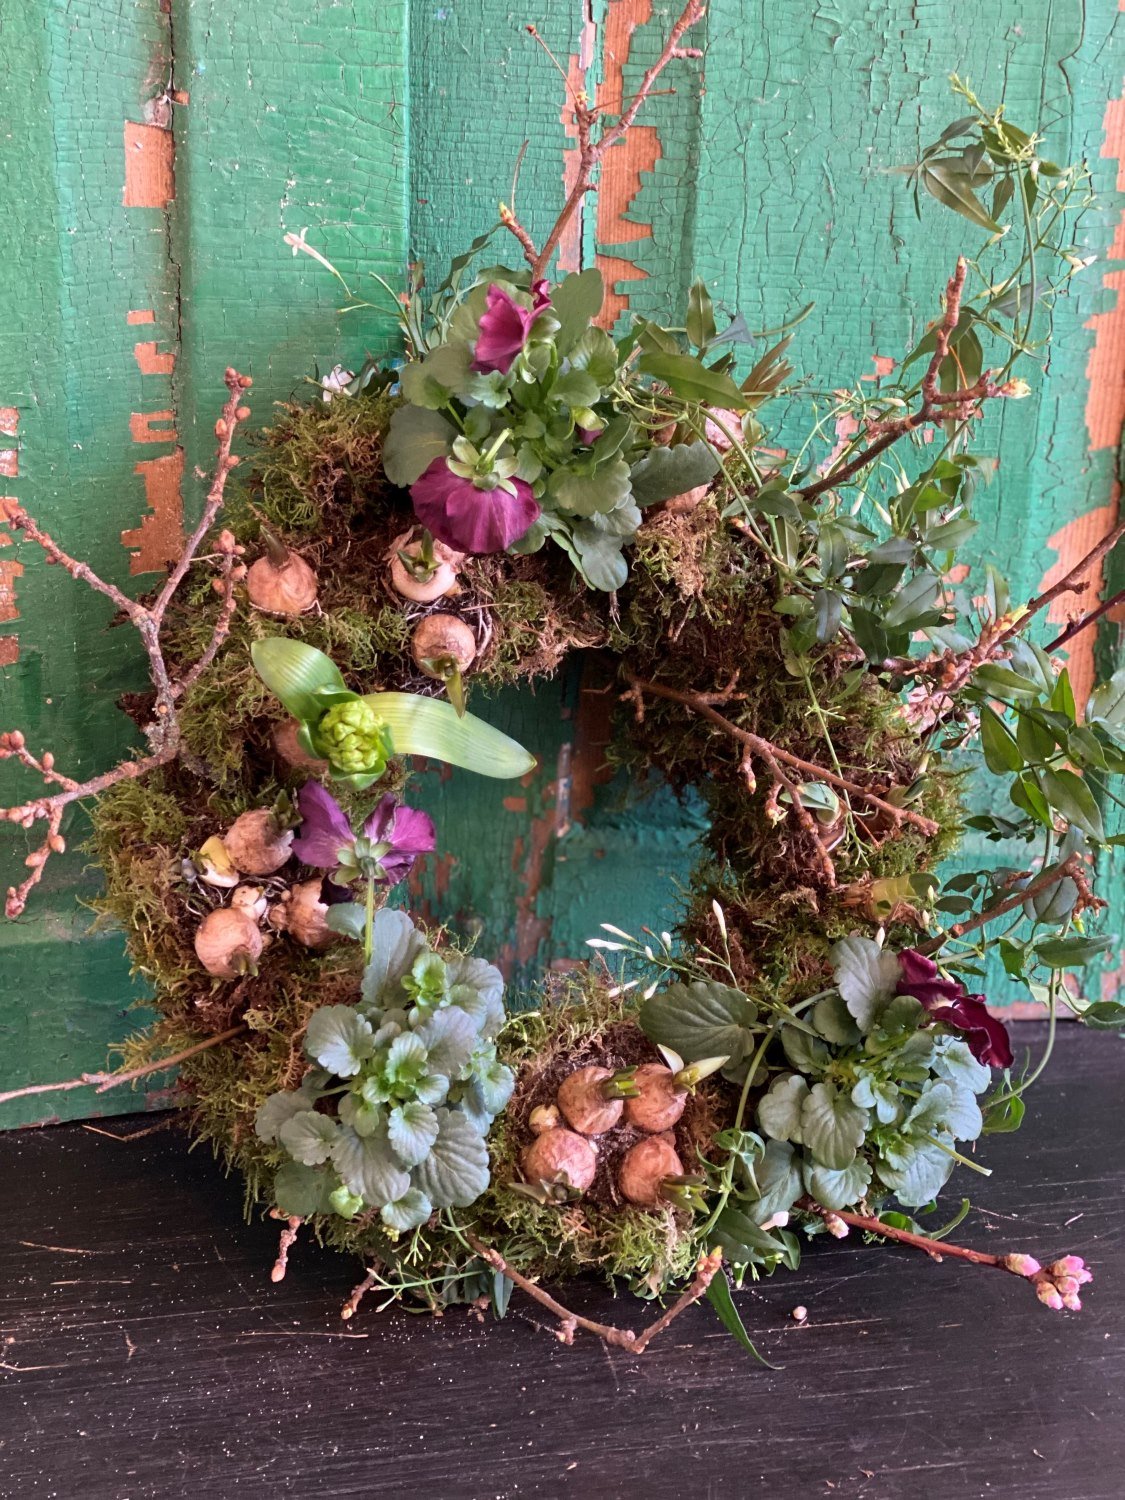 Rustic planted living wreath against a green wooden background